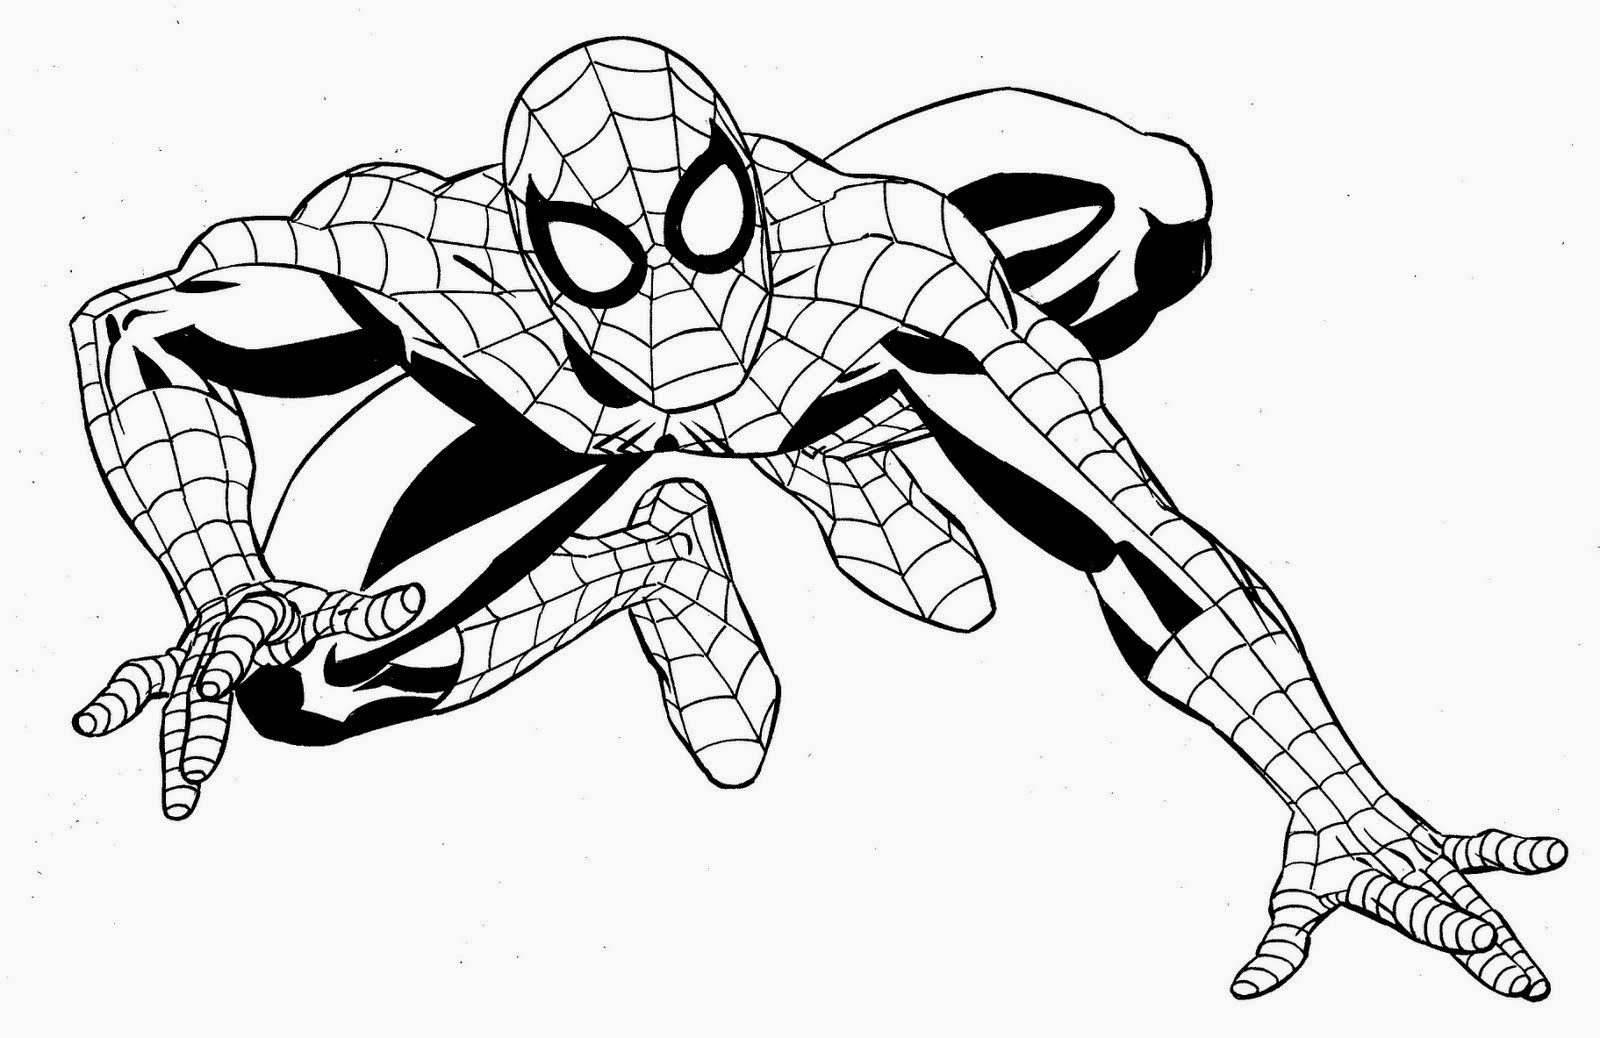 Free Printable Superhero Coloring Pages
 Coloring Pages Superhero Coloring Pages Free and Printable